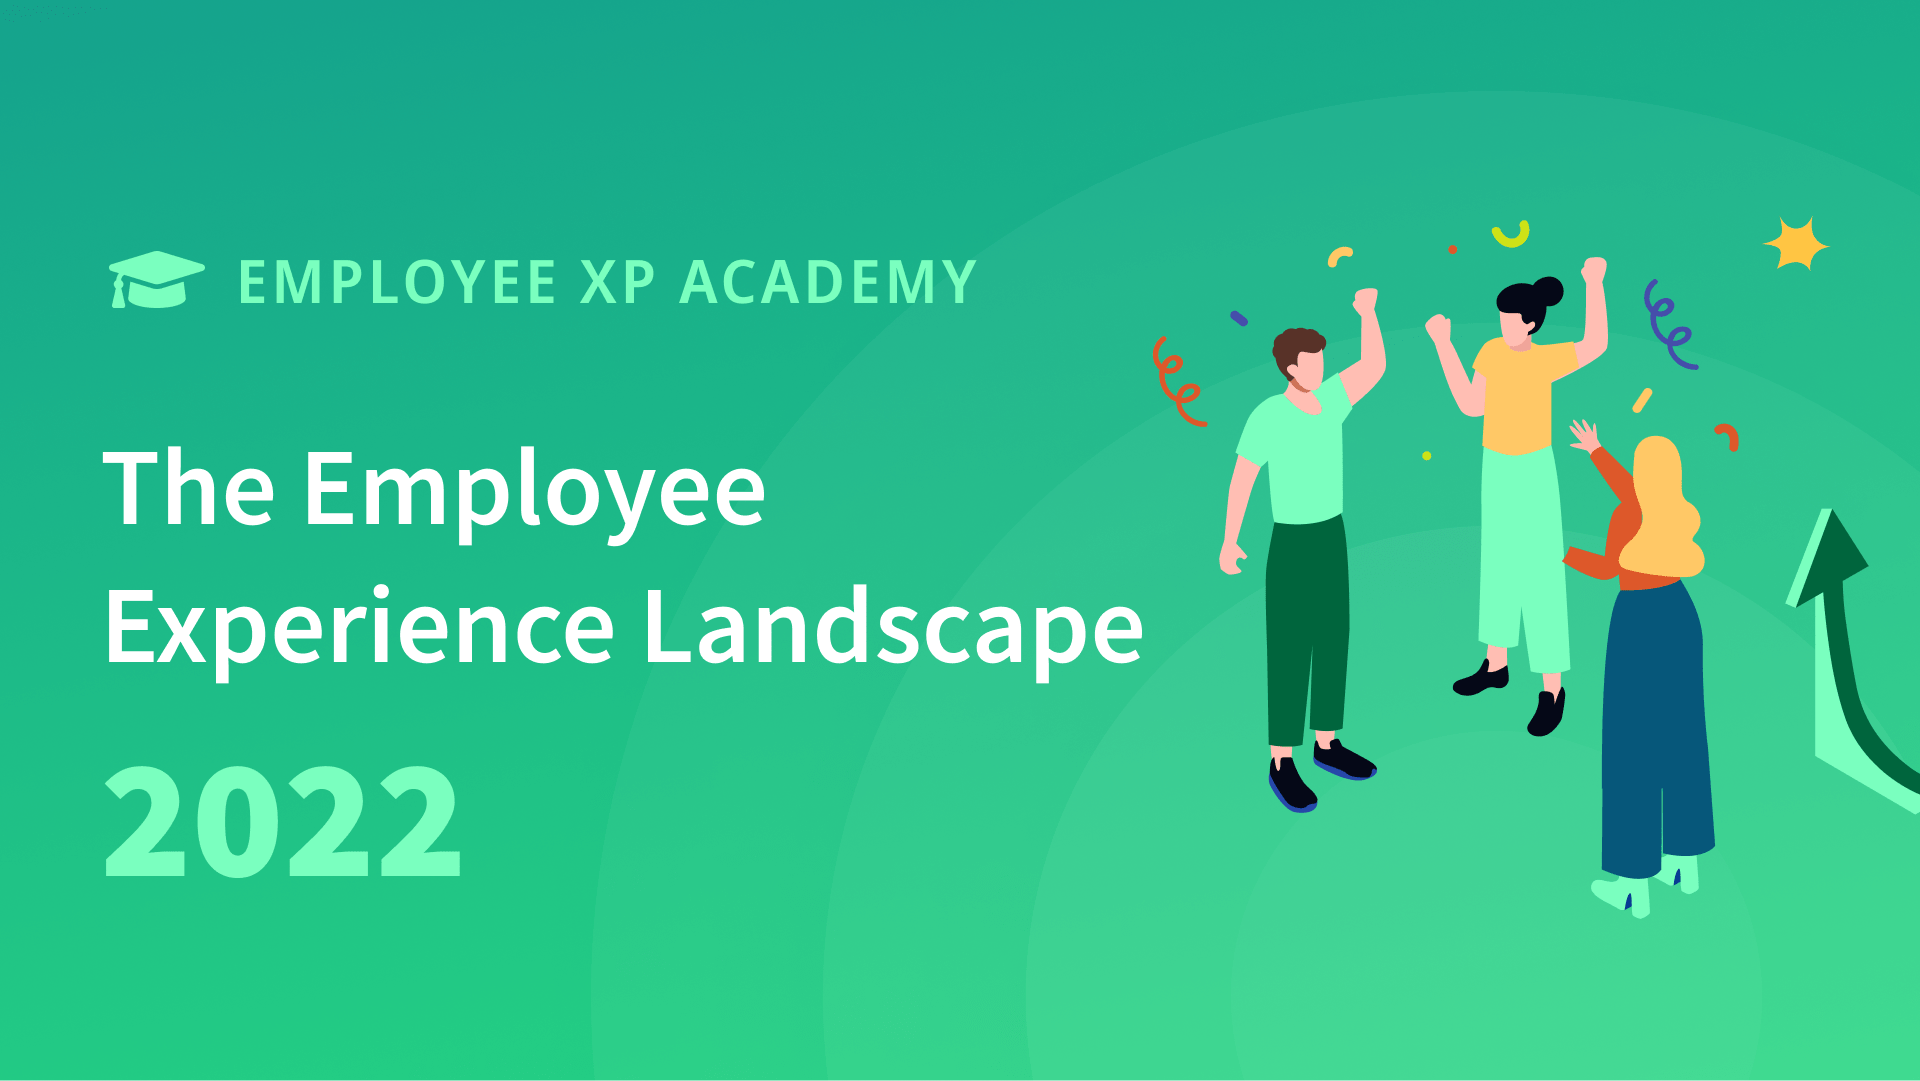 The Employee Experience Landscape